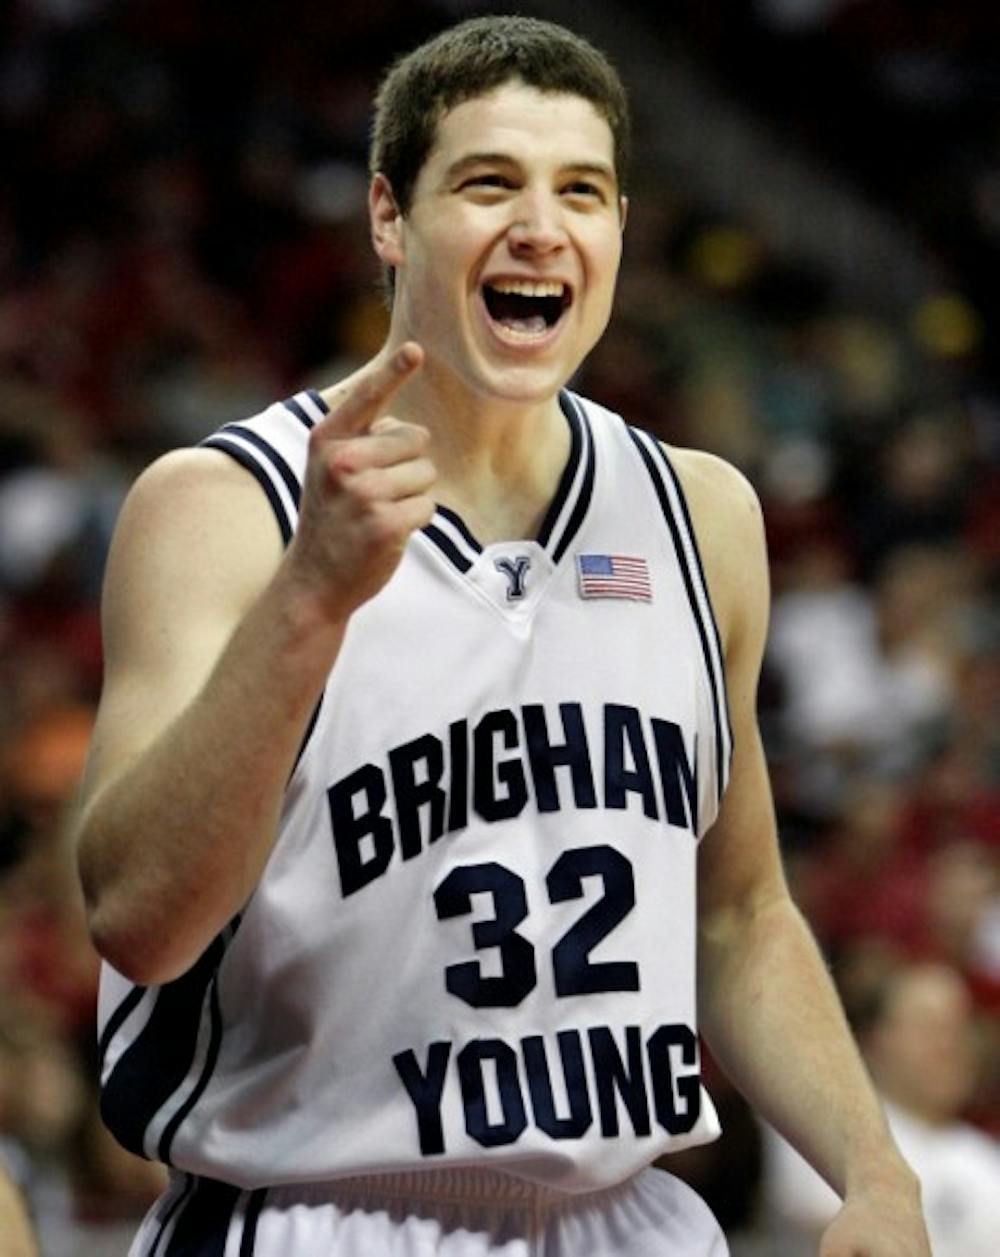 (photo courtesy of midwestsportsfans.com) Garret didn't buy into the 'Jimmer-mania', feeling that BYU received much too high on a seed in the recent NCAA tournament.